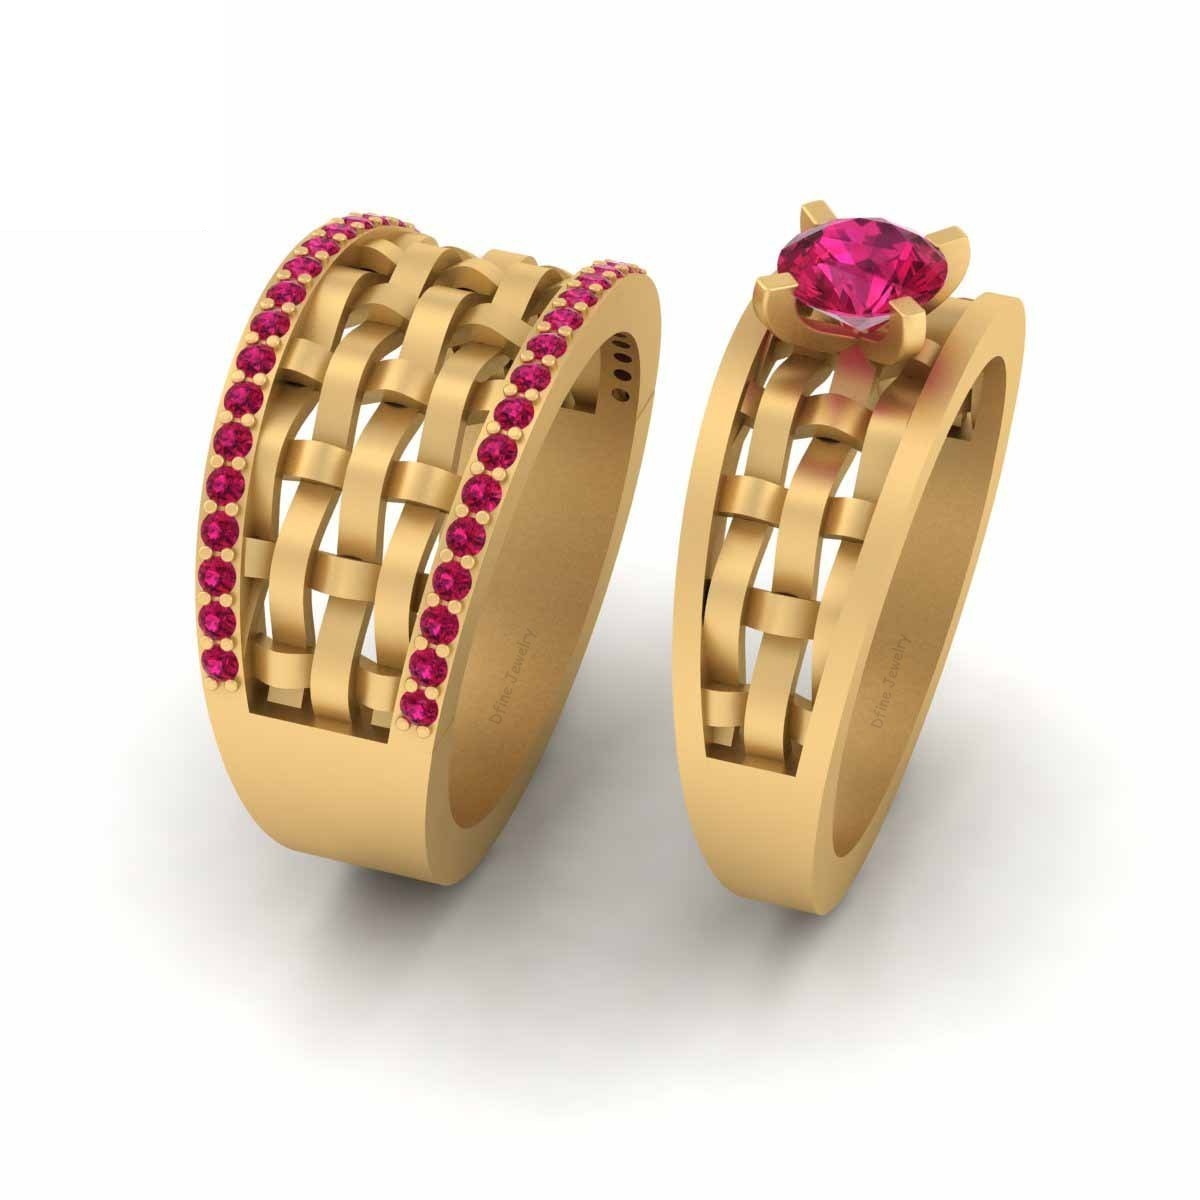 Dfj - Mesh design matching couple set his and hers wedding rings in solid yellow gold